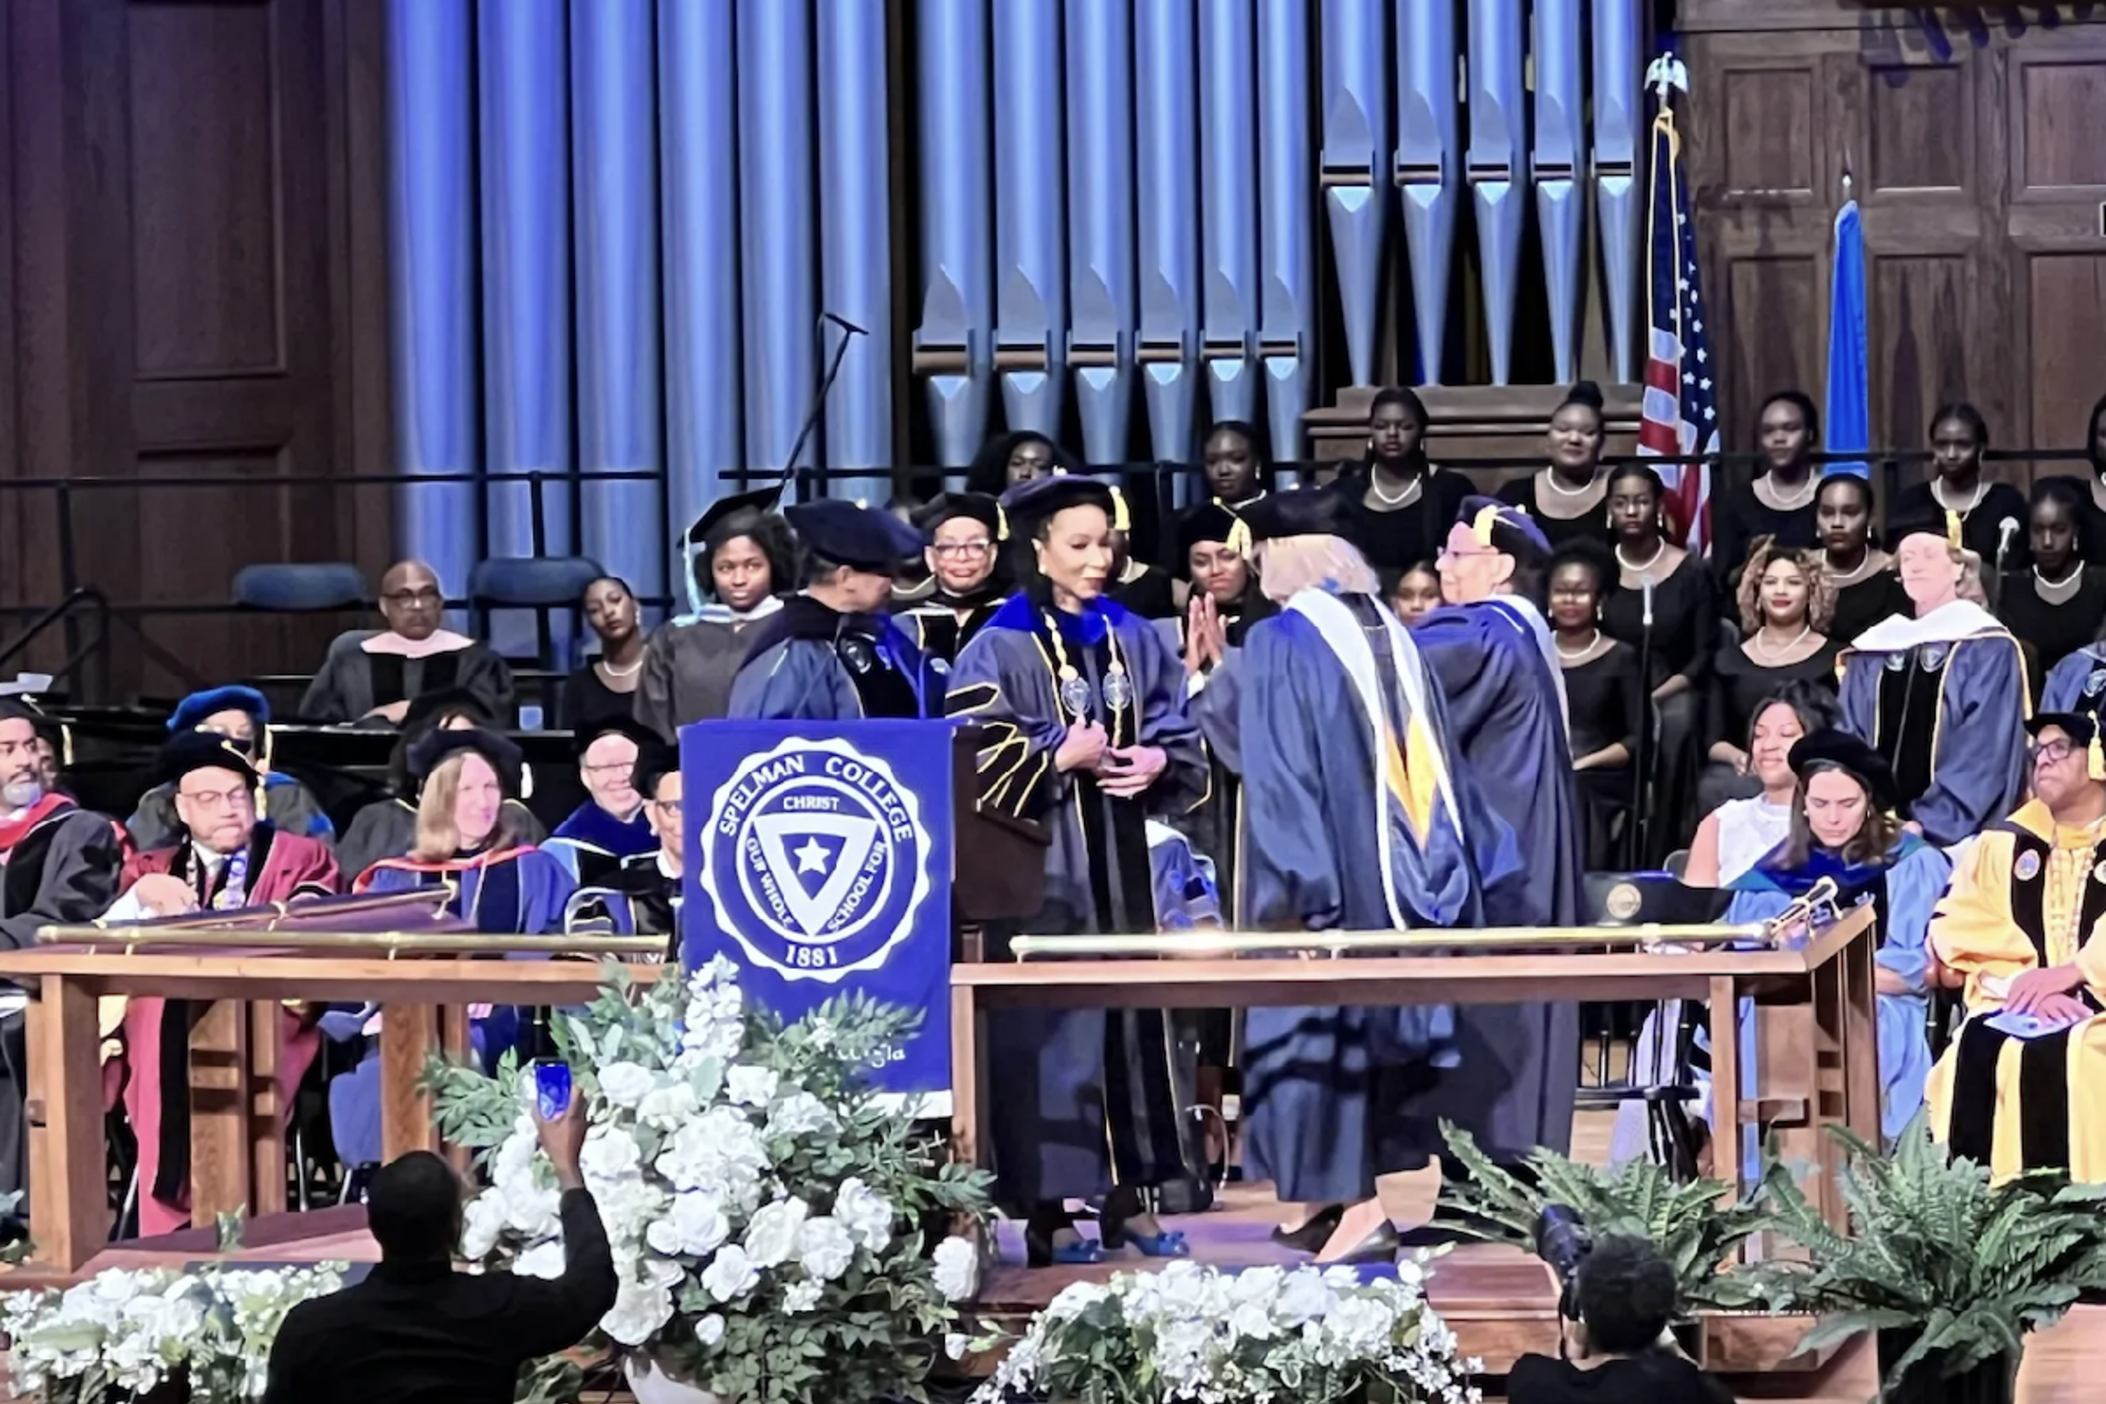 On April 28, Spelman College officially inaugurated their 11th president, Dr. Helene Gayle.